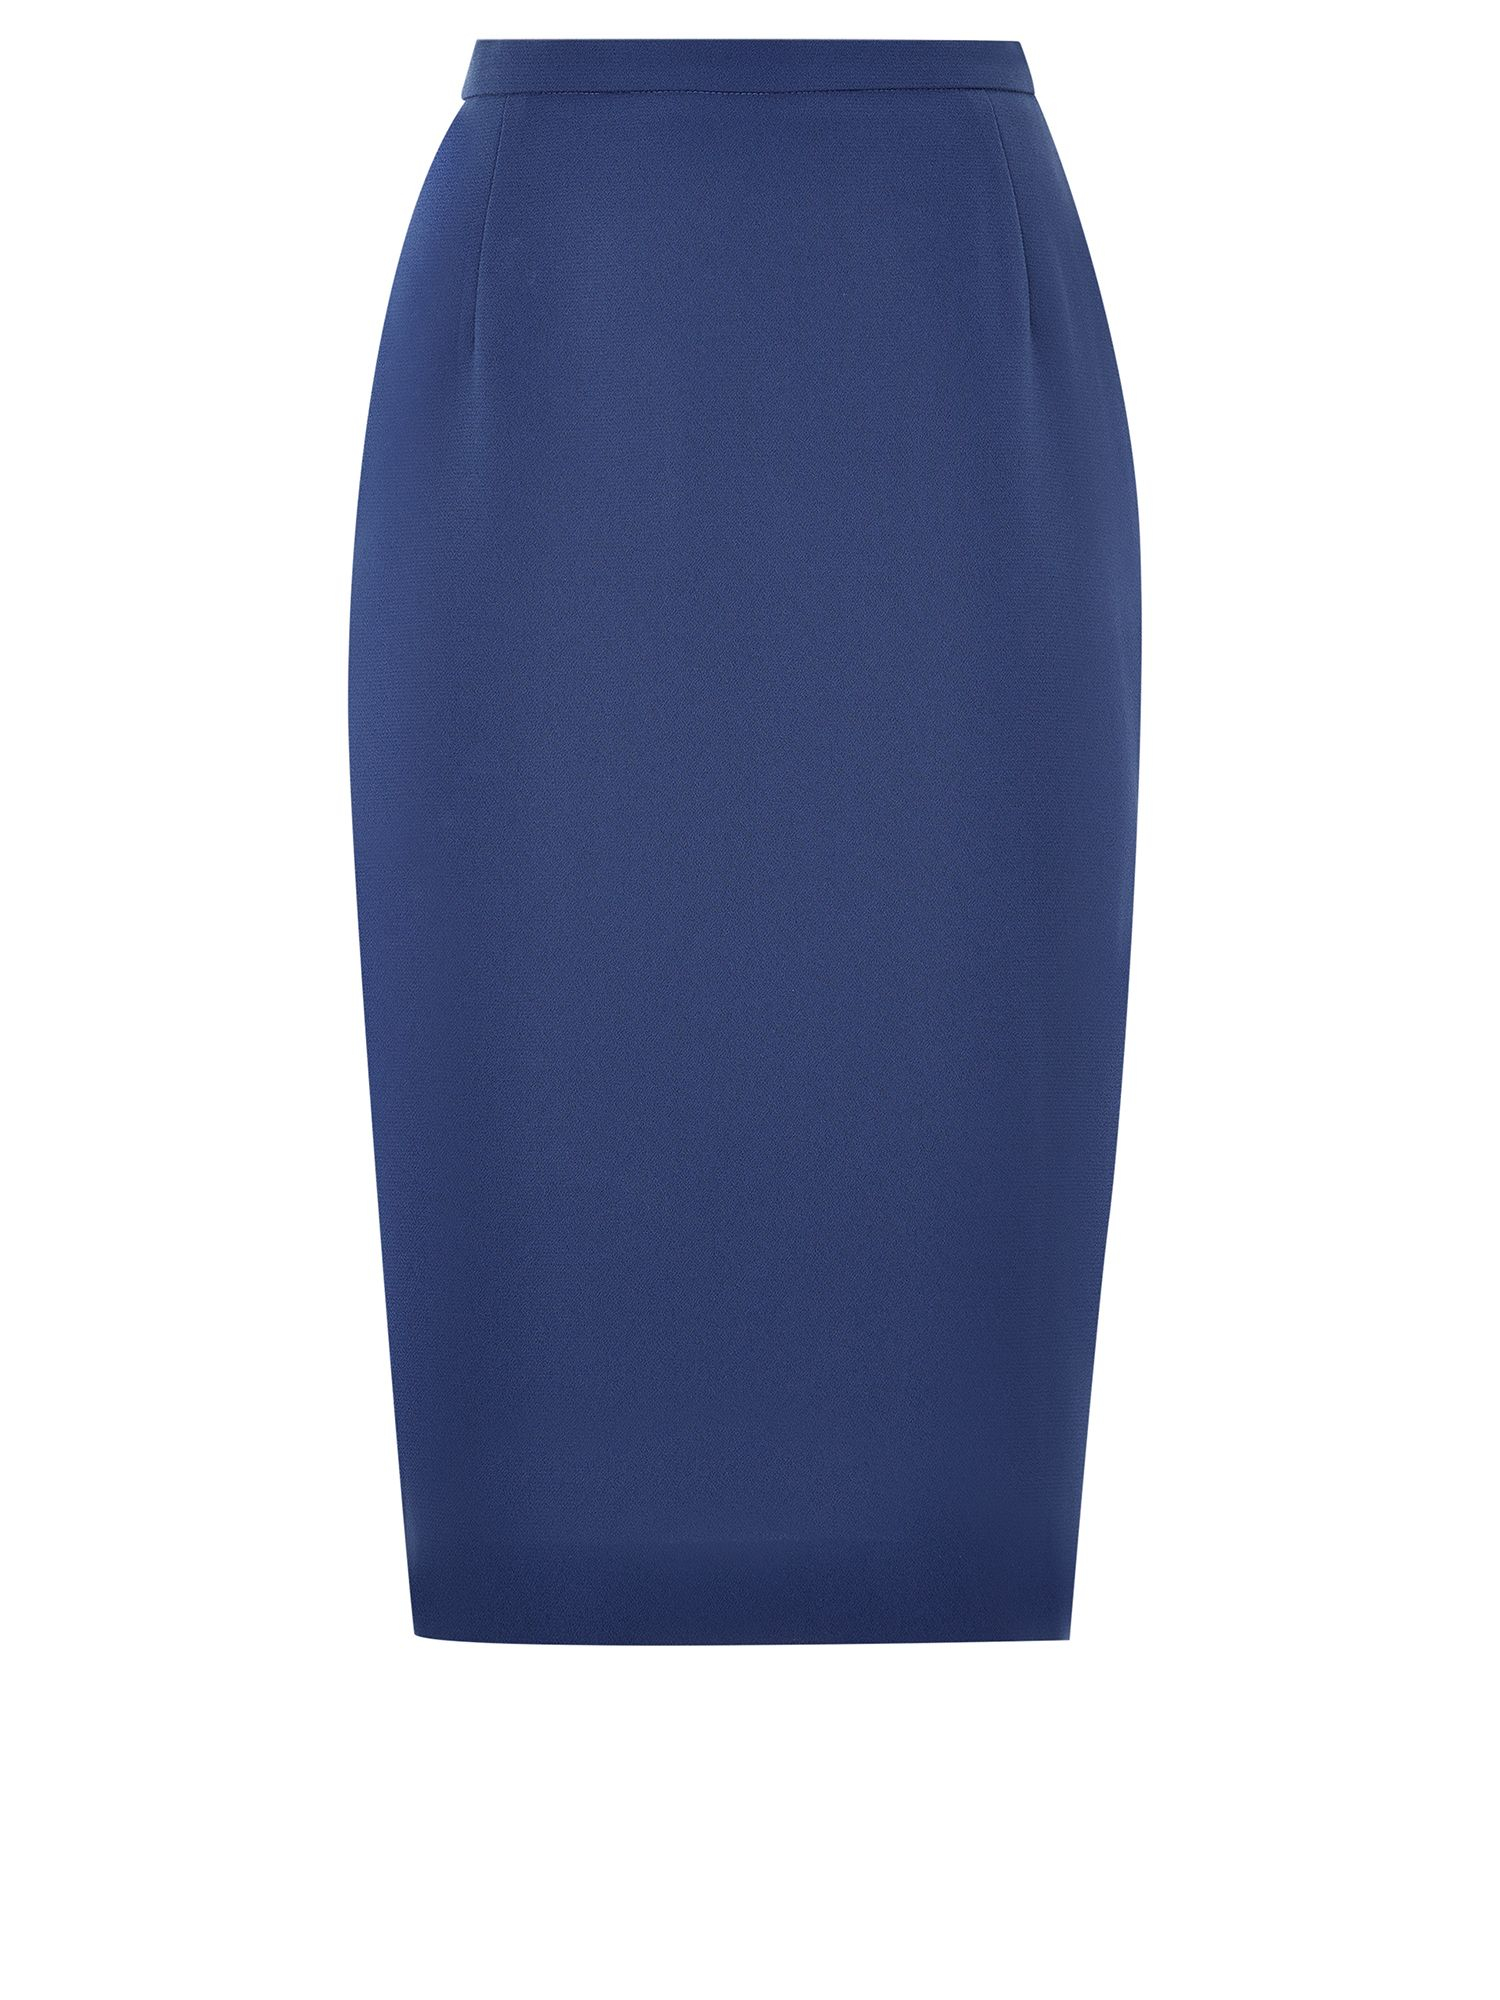 Eastex French Navy Pencil Skirt in Blue (Navy) | Lyst